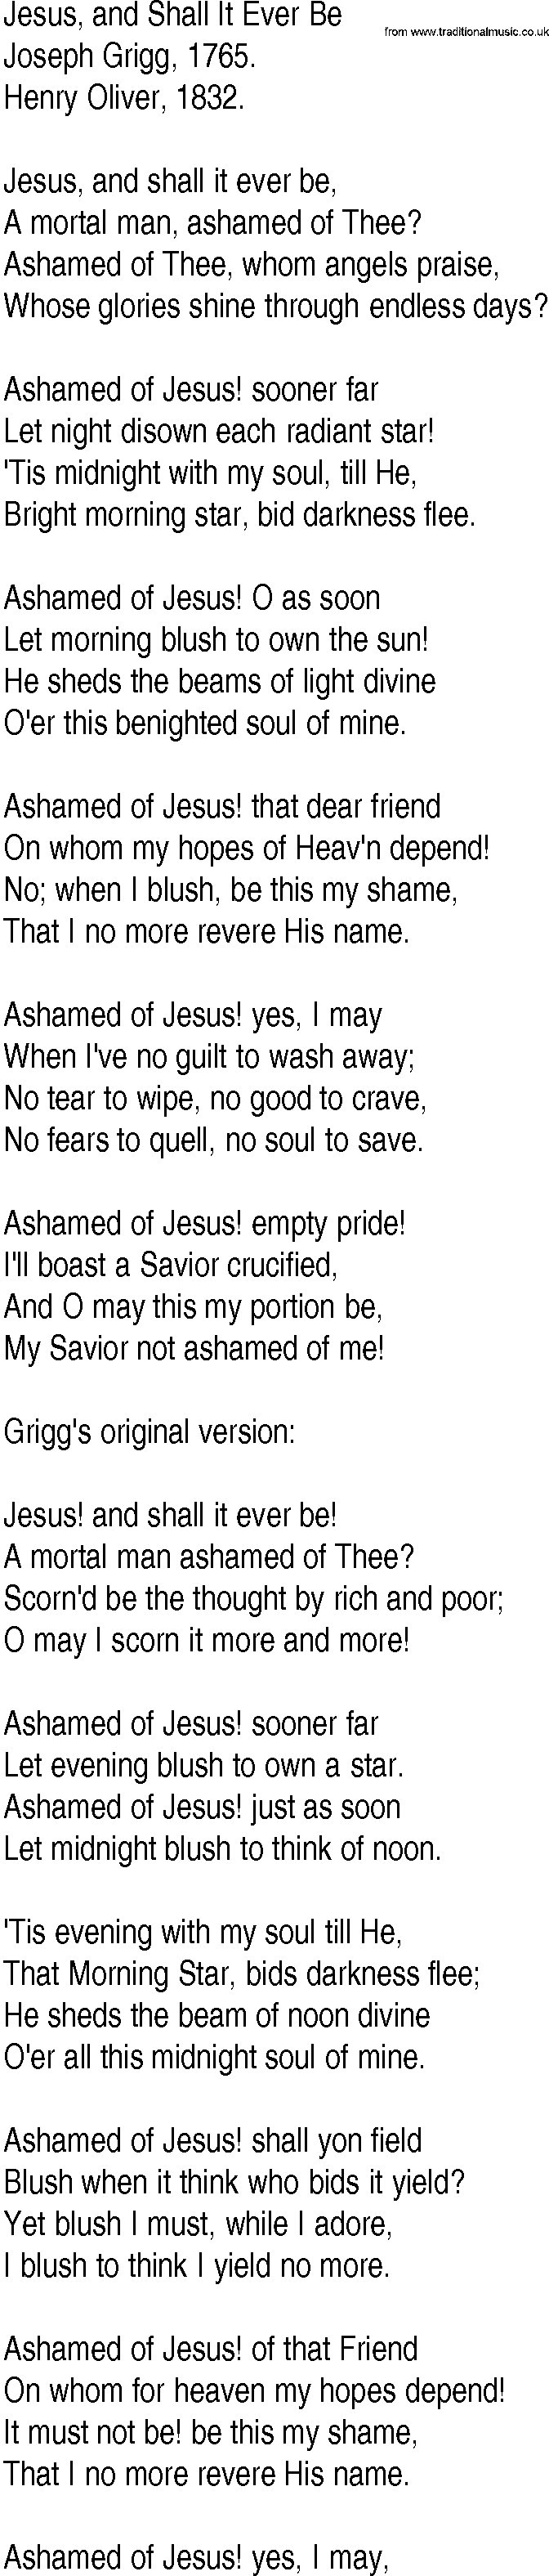 Hymn and Gospel Song: Jesus, and Shall It Ever Be by Joseph Grigg lyrics